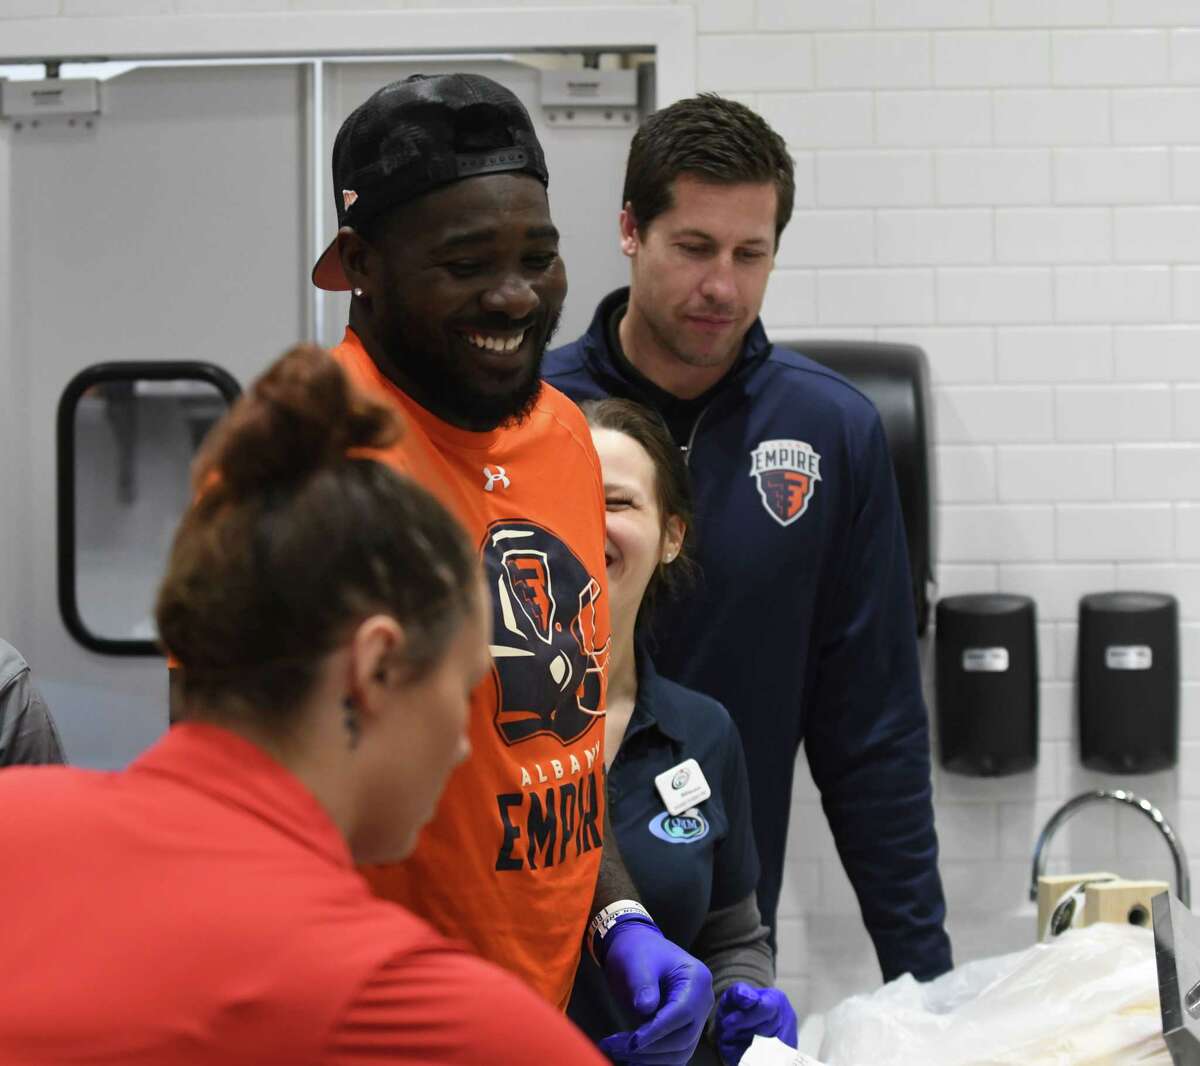 Albany Empire players Joe Sykes, center, and Tommy Grady, right, from the Albany Empire Arena Football League team, make sandwiches at the new Empire Deli at Albany International Airport on Friday, April 5, 2019, in Colonie, N.Y. The deli is located near the security gate on the unsecured side. It is branded in conjunction with the arena football team. (Will Waldron/Times Union)